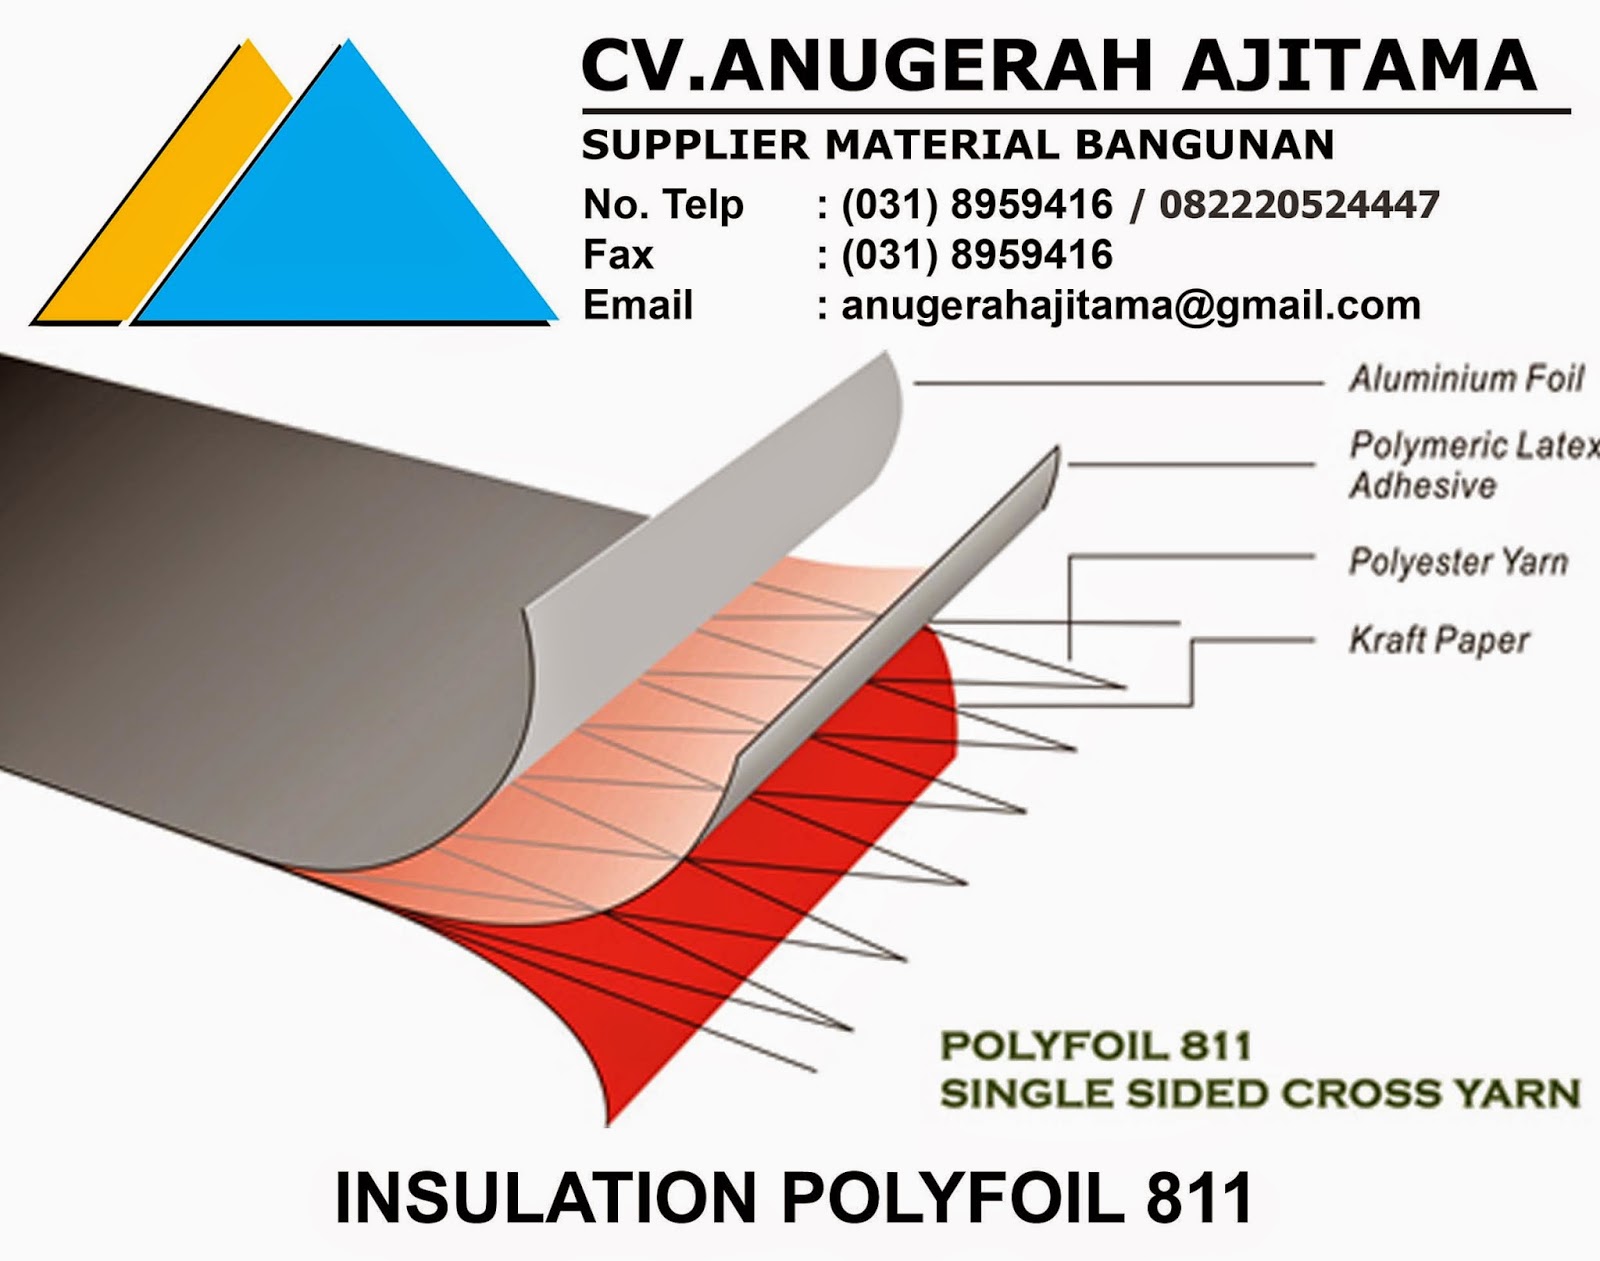 INSULATION POLYFOIL 811